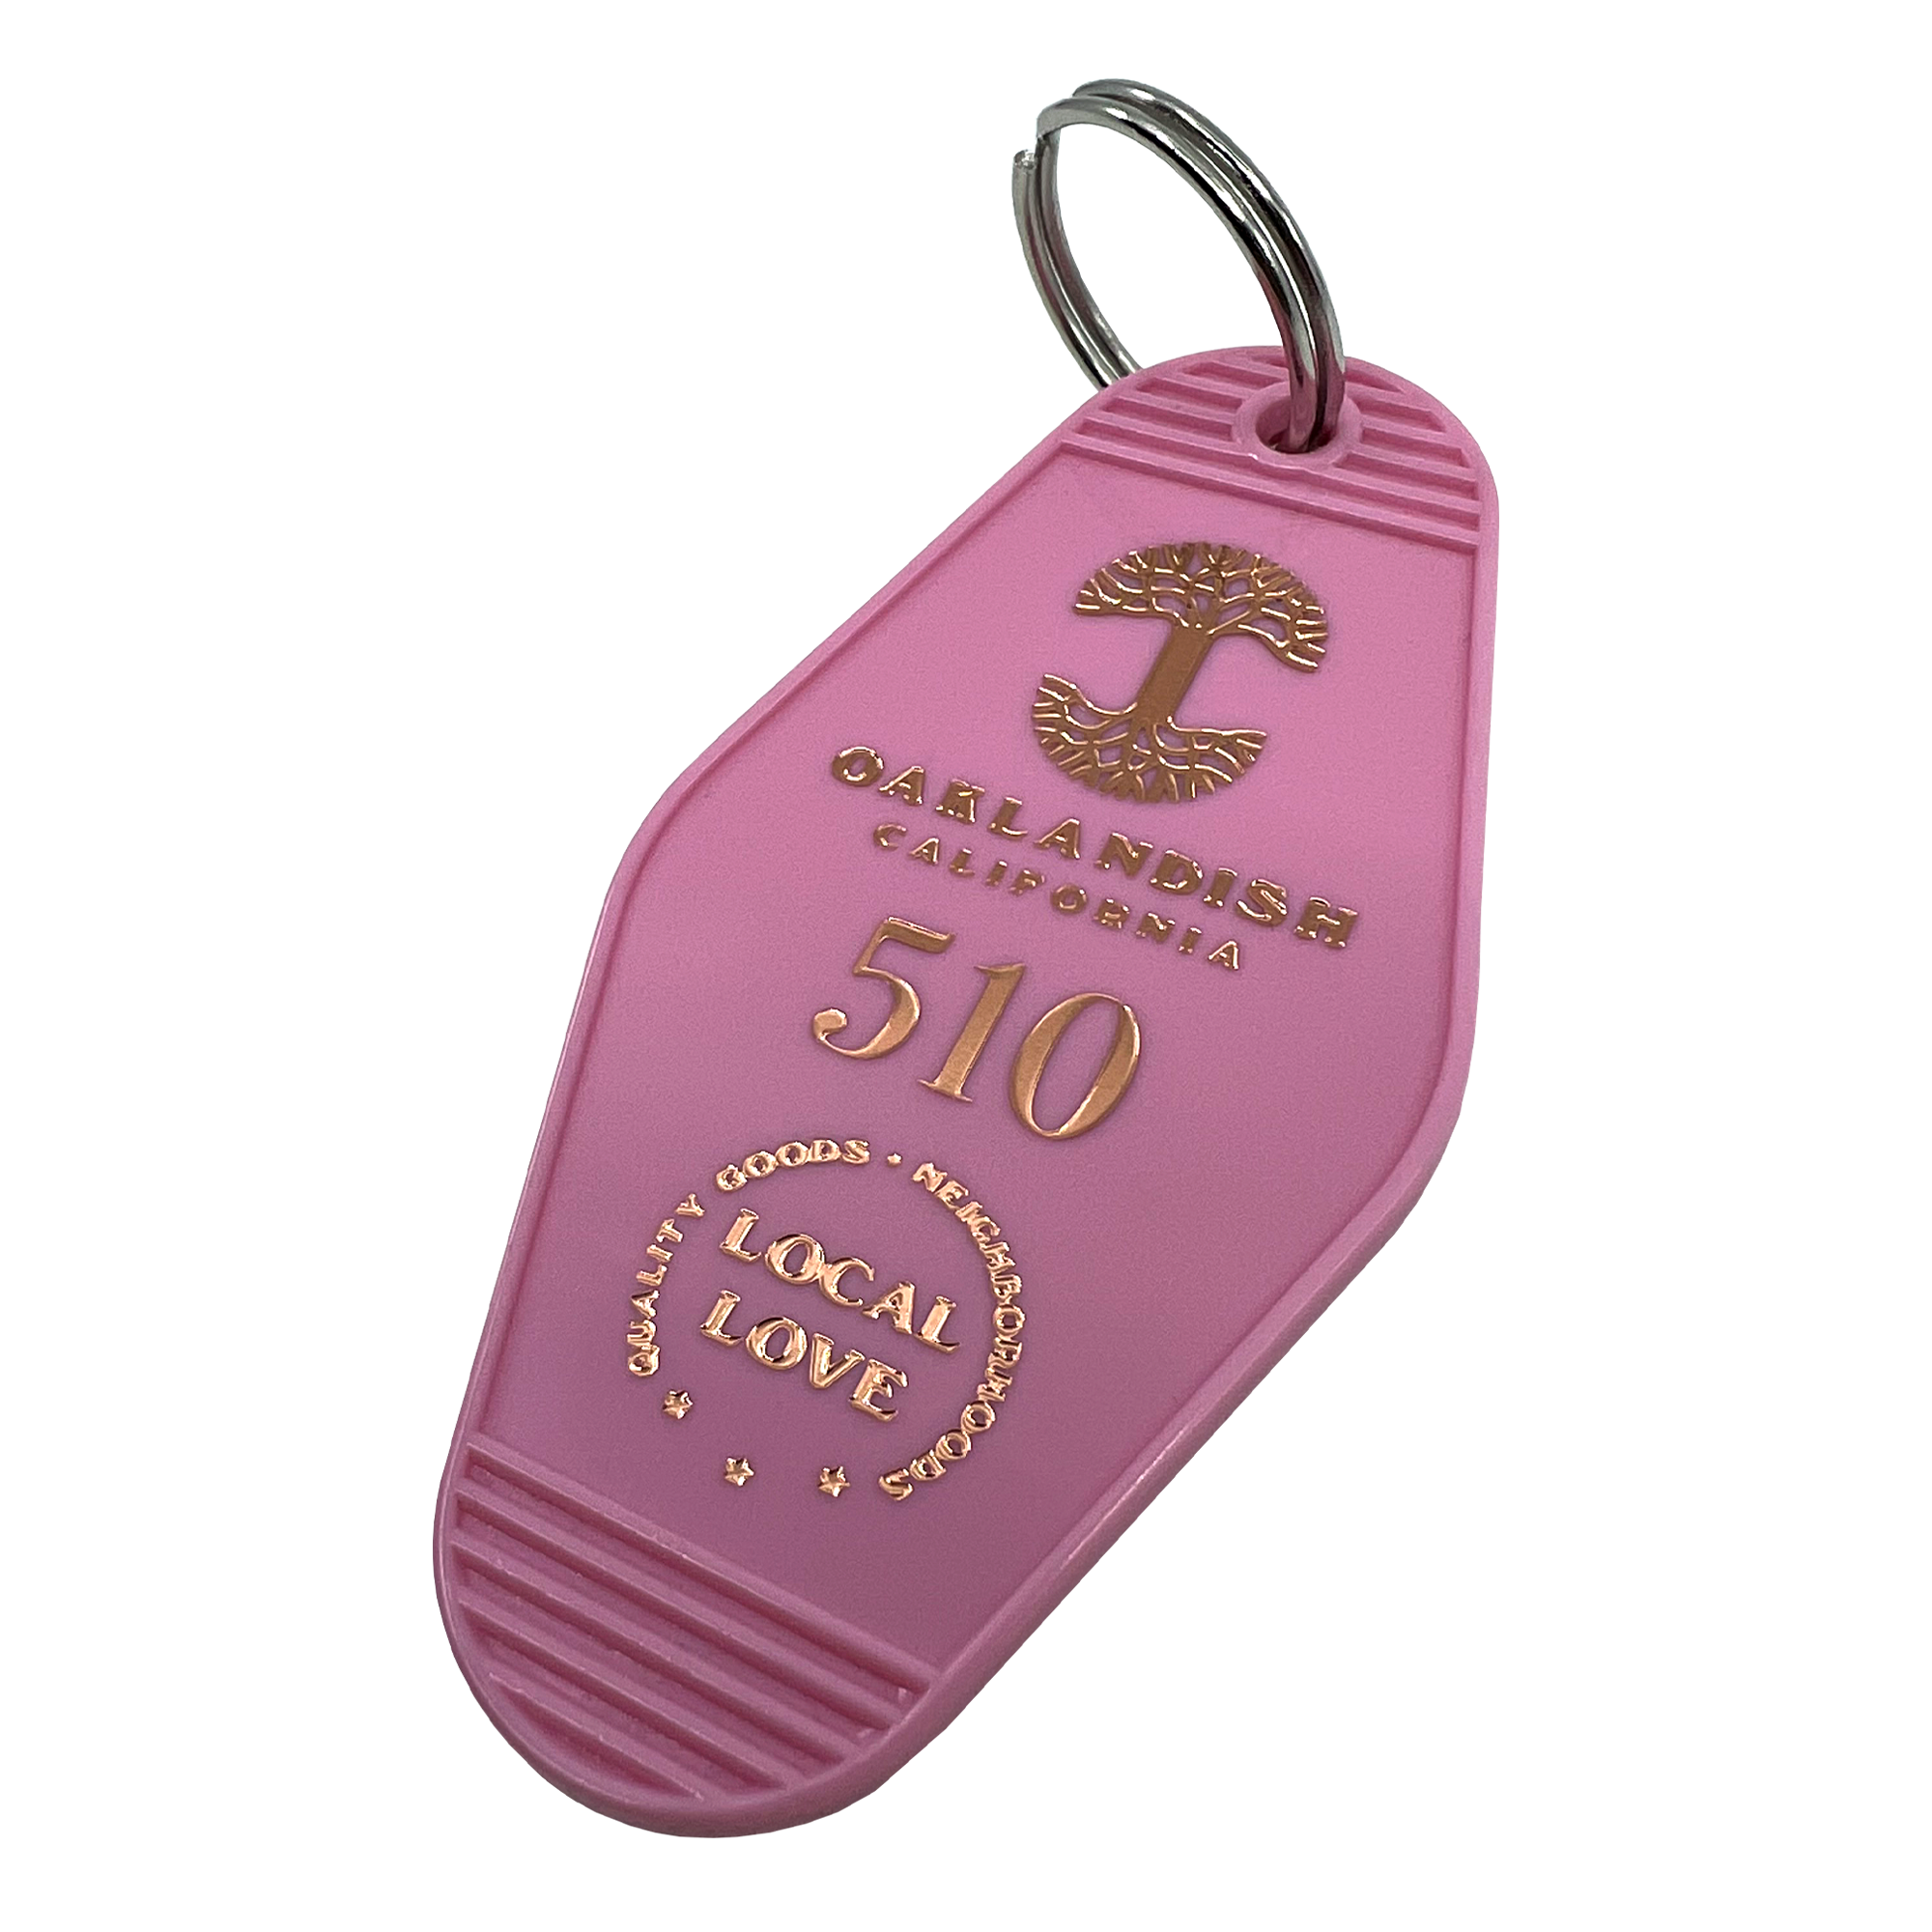 Detailed angle image of Pink vintage motel-style keychain with gold Oaklandish Logo and wordmark and 510 local love logo.